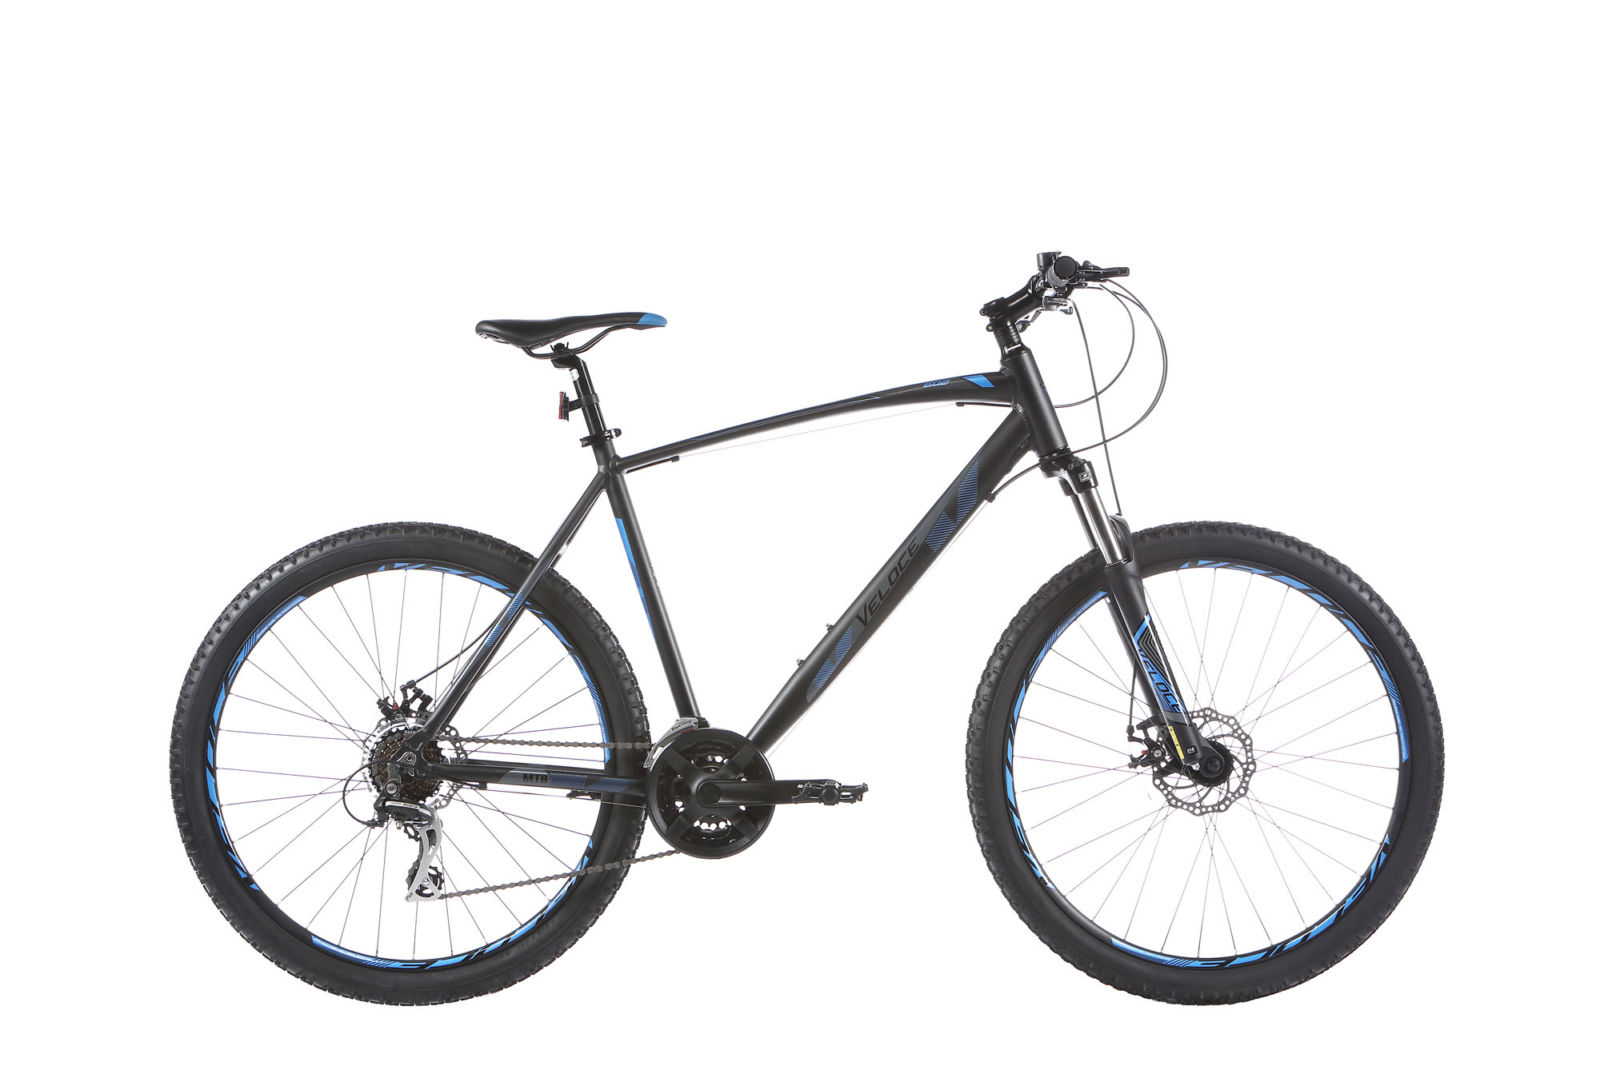 Outrage 602 Herenfiets 43 cm Antraciet blauw Acera  21 sp